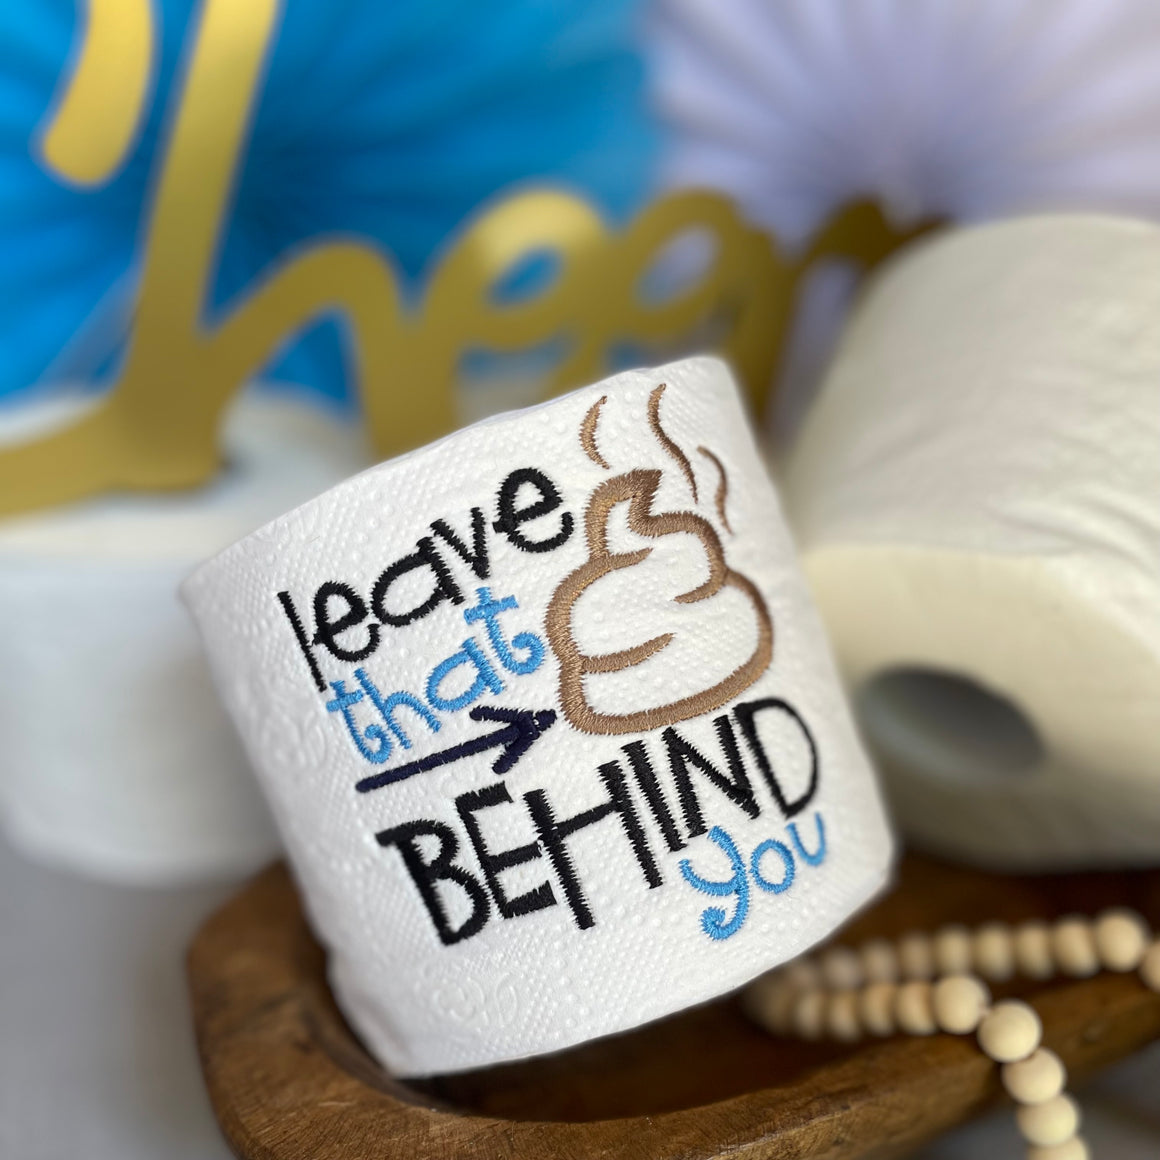 "Leave that ! Behind" Retirement Gift Toilet Paper